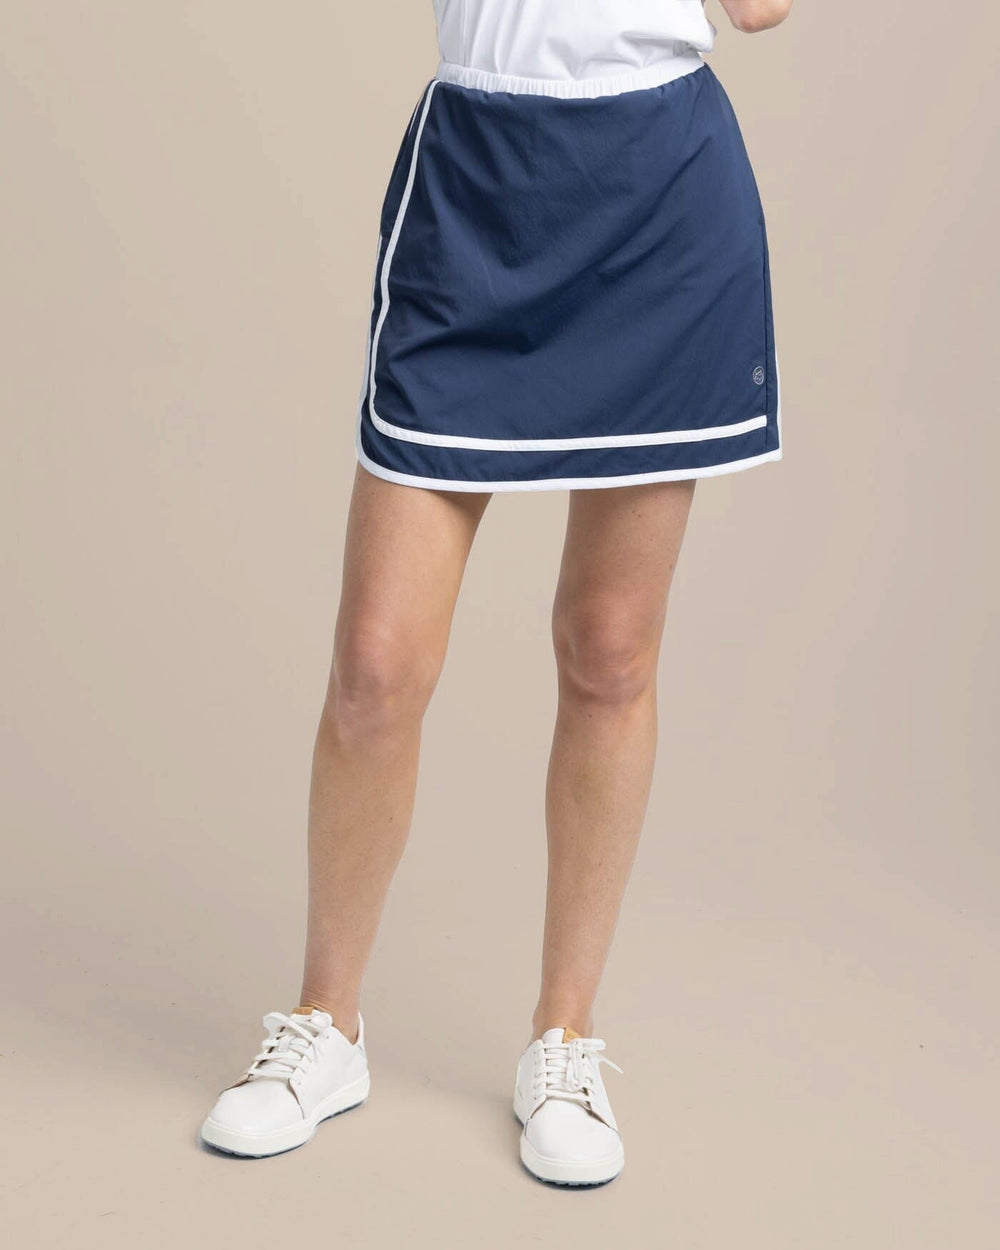 The front view of the Southern Tide Elaina Golf Skort by Southern Tide - Dress Blue